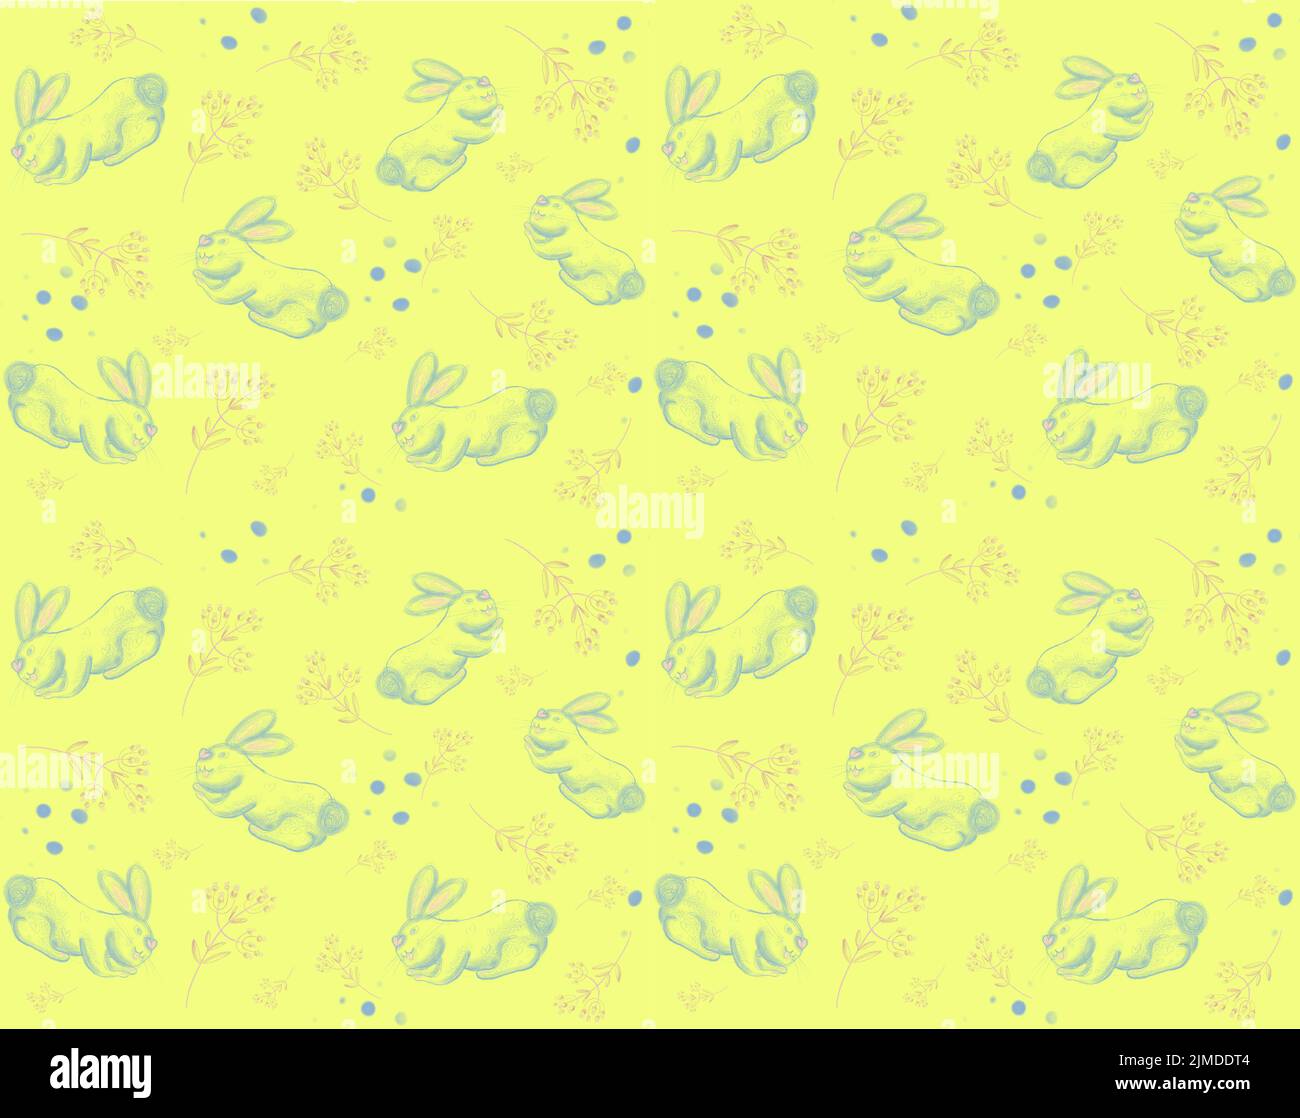 A seamless pattern of cute easter bunnies on a yellow background Stock Vector